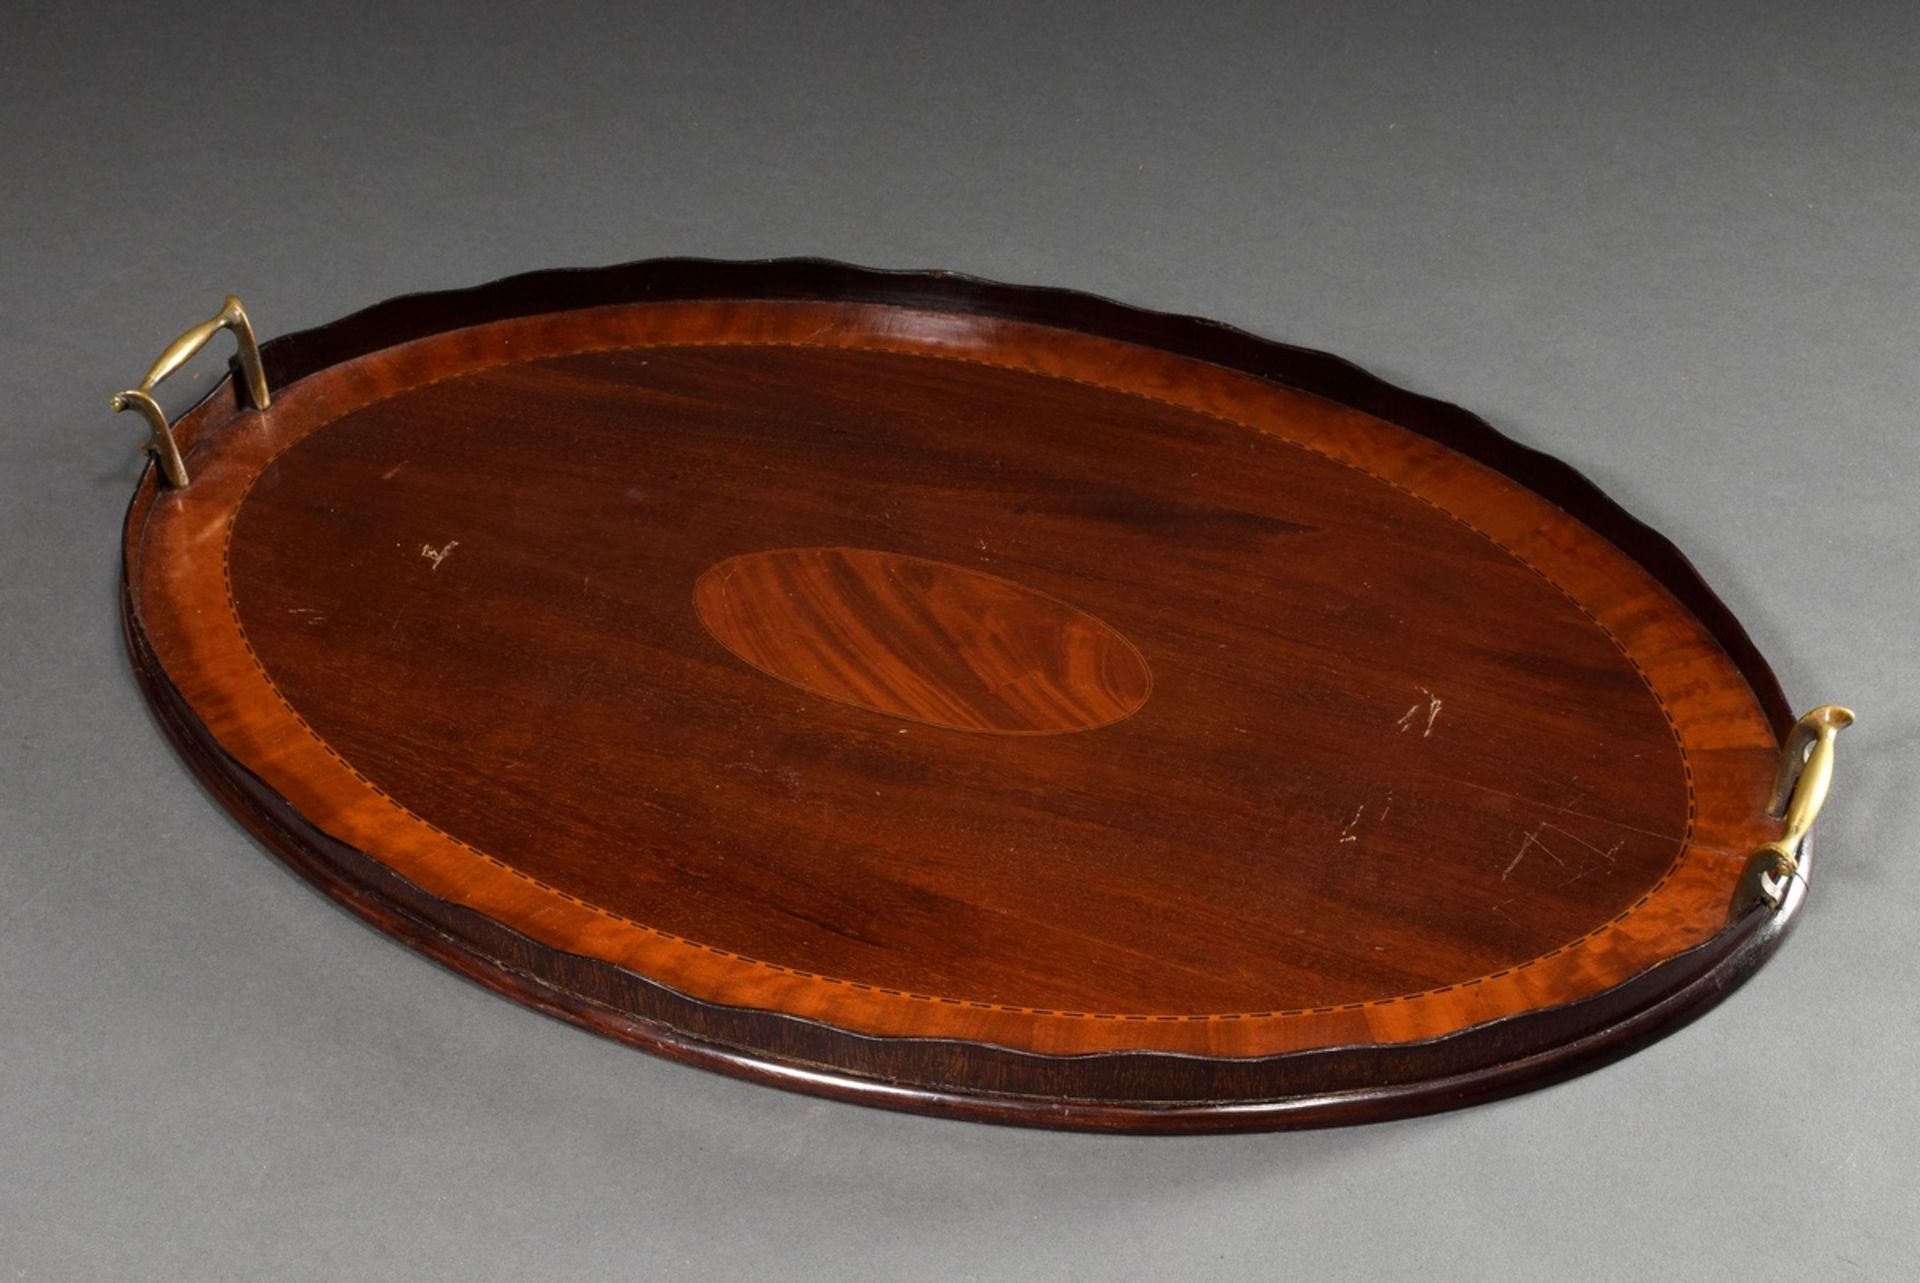 Large oval mahogany tray with ribbon inlay, brass handles on the sides and curved gallery rim, Engl